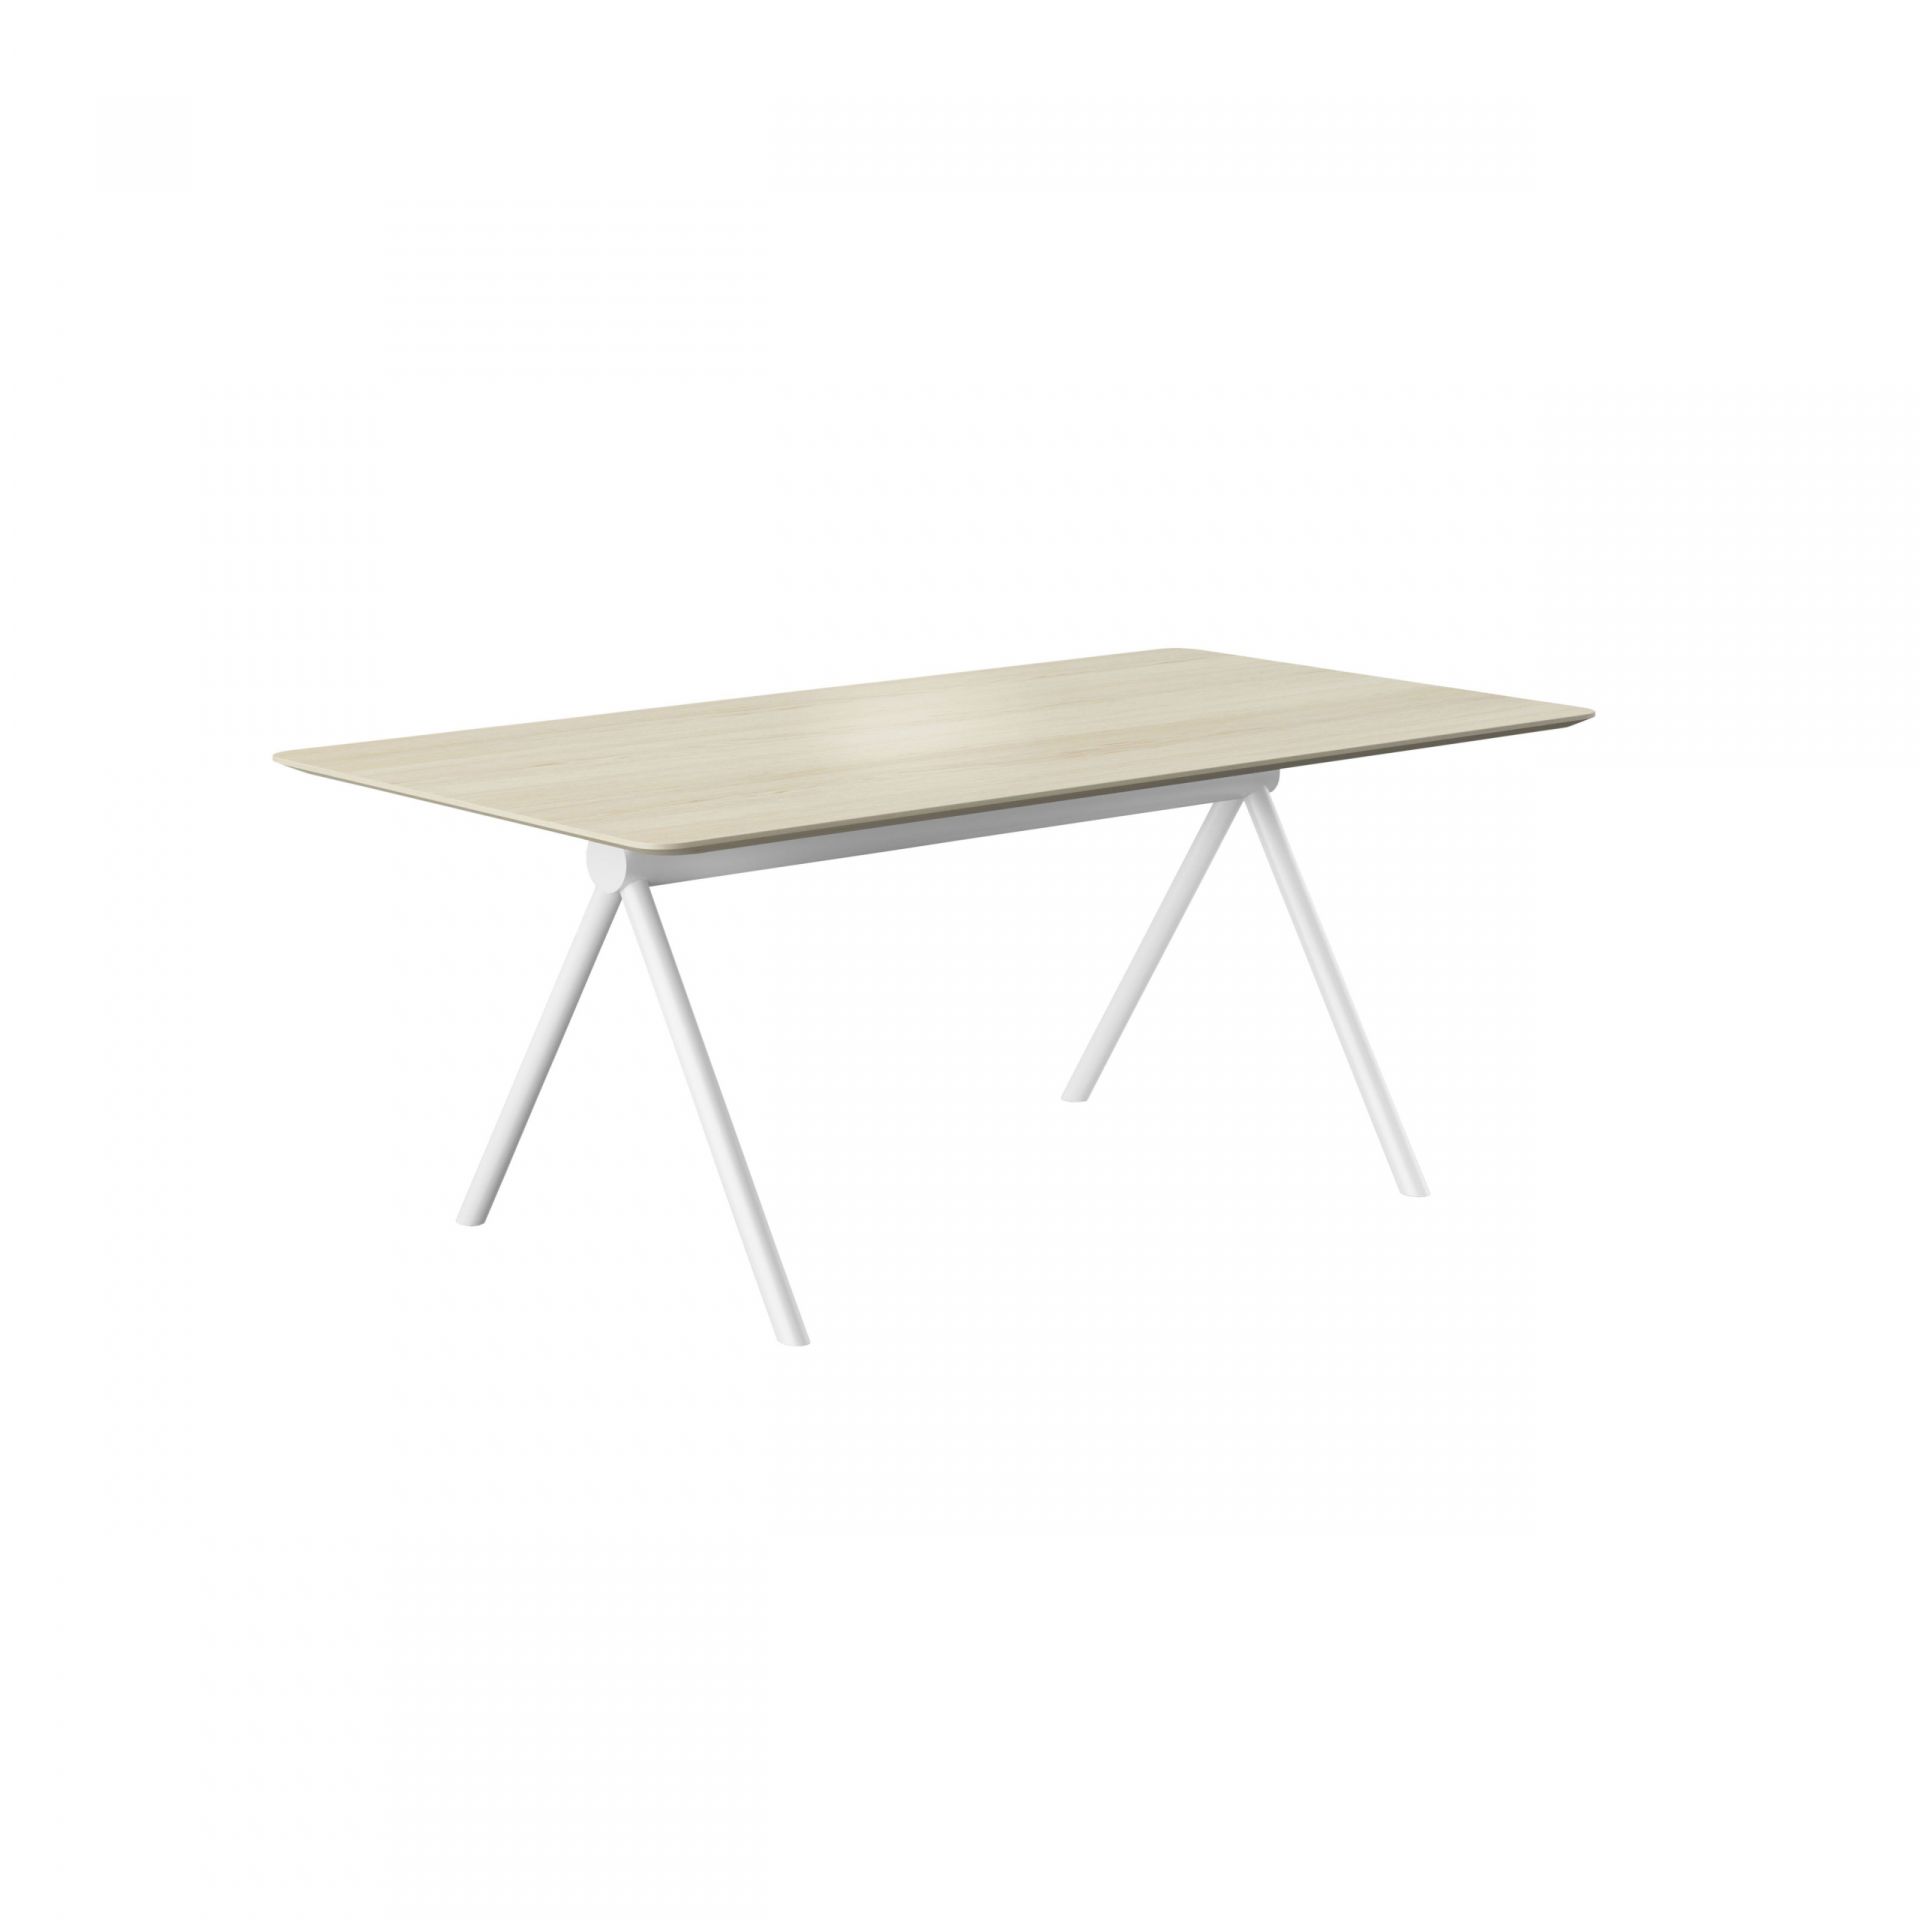 Avia Table with built-in cable management product image 1